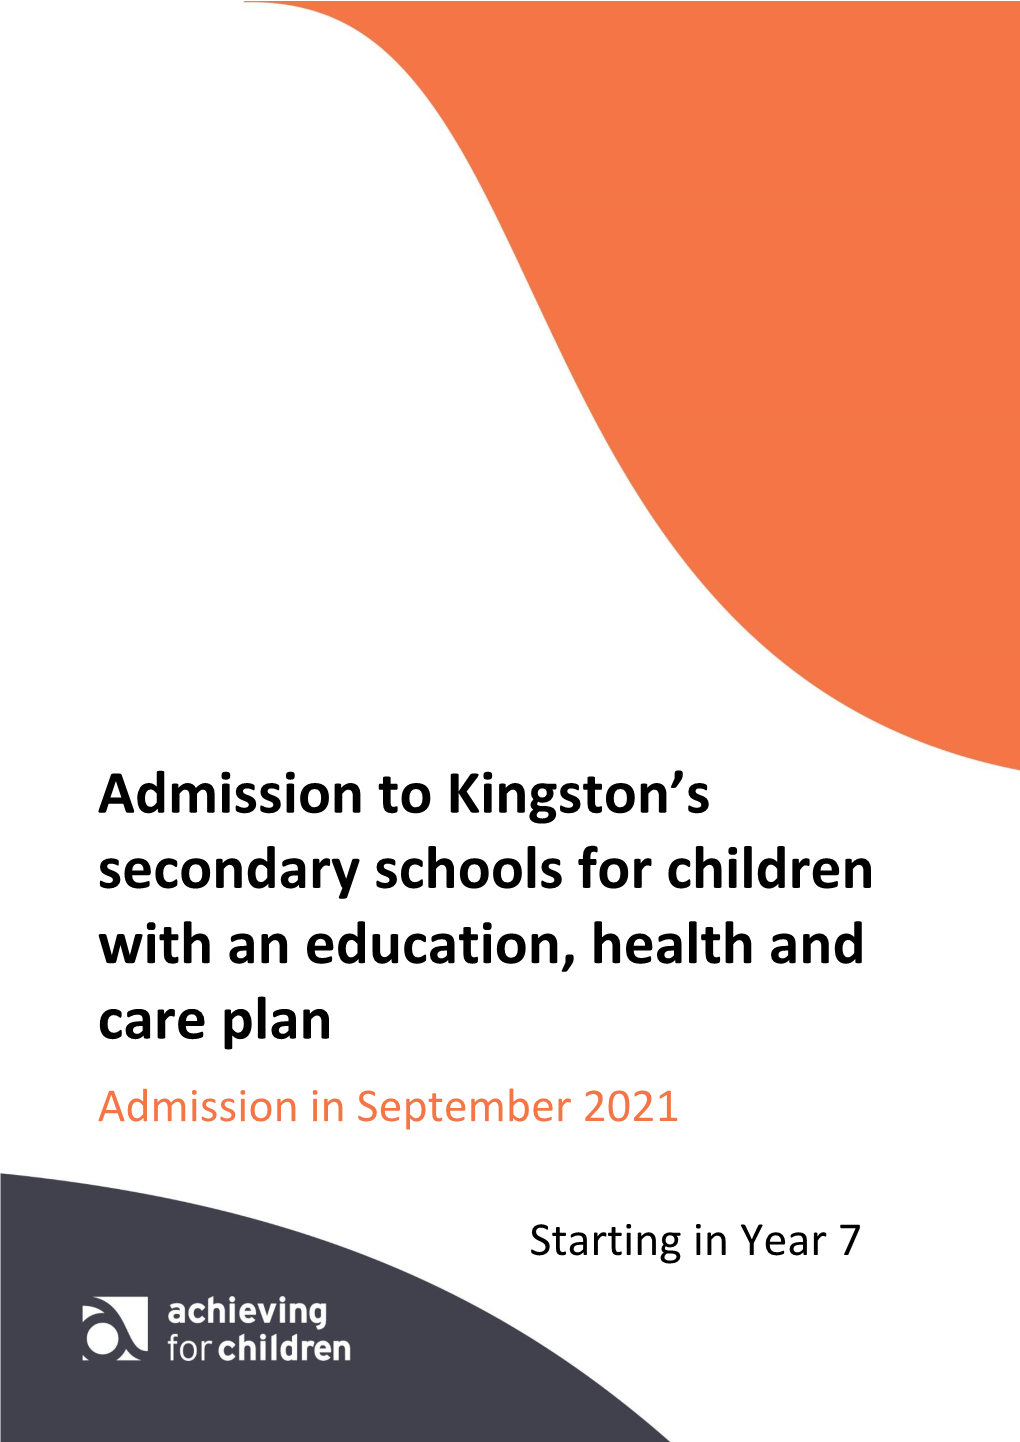 Admission to Kingston's Secondary Schools for Children with An